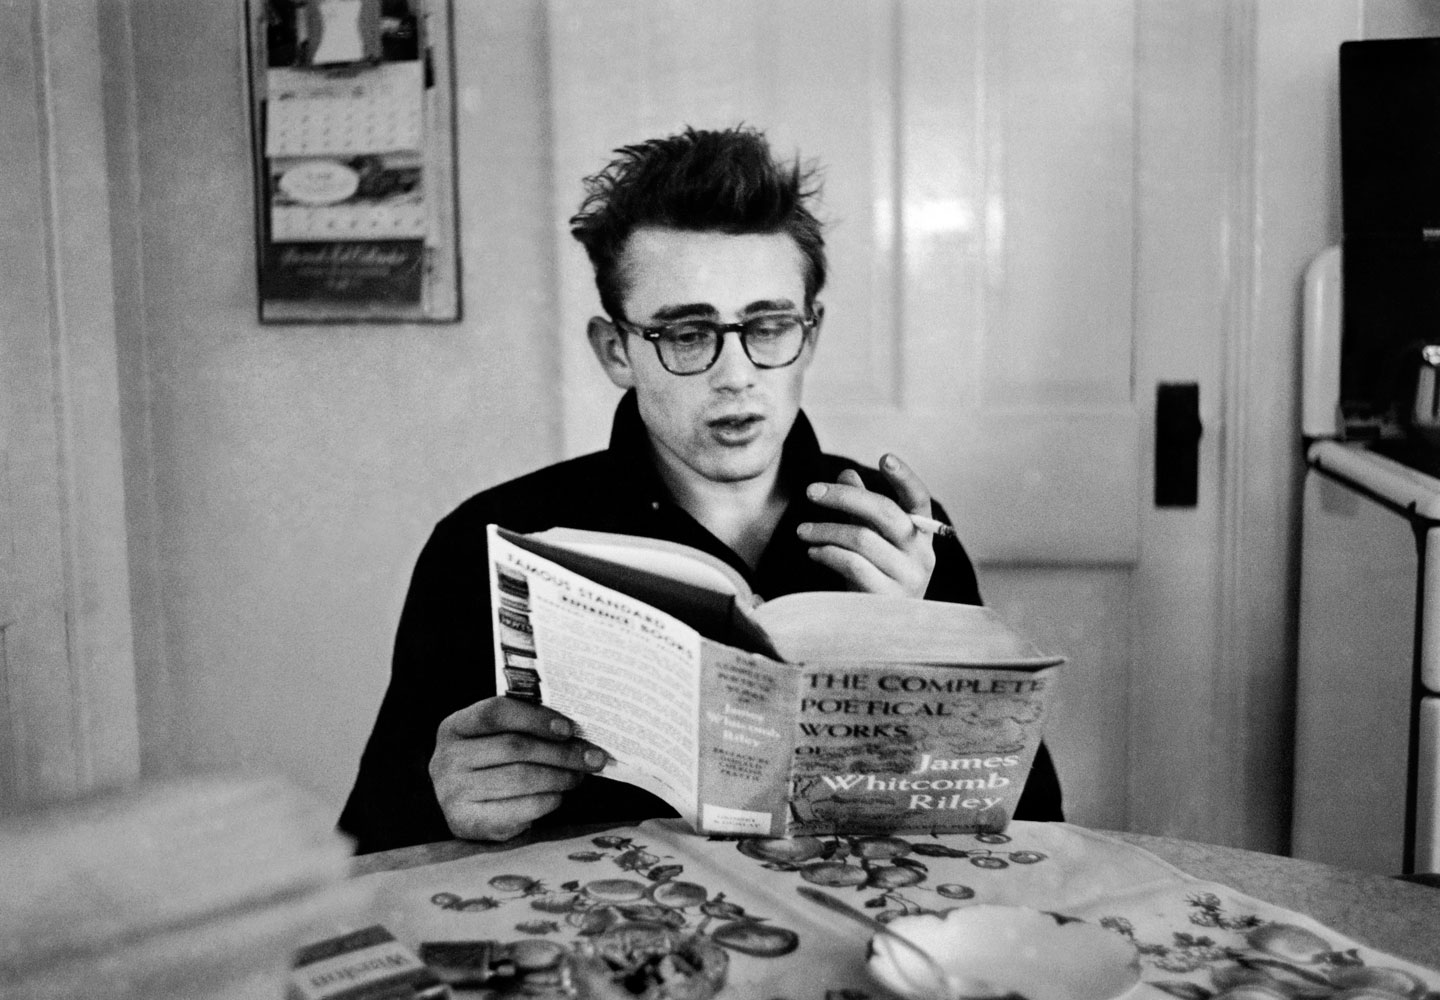 James Dean visits the farm of his uncle, Marcus Winslow, in Fairmont, Indiana, in 1955 and in the dining room reads some poetry by James Whitcomb Riley.